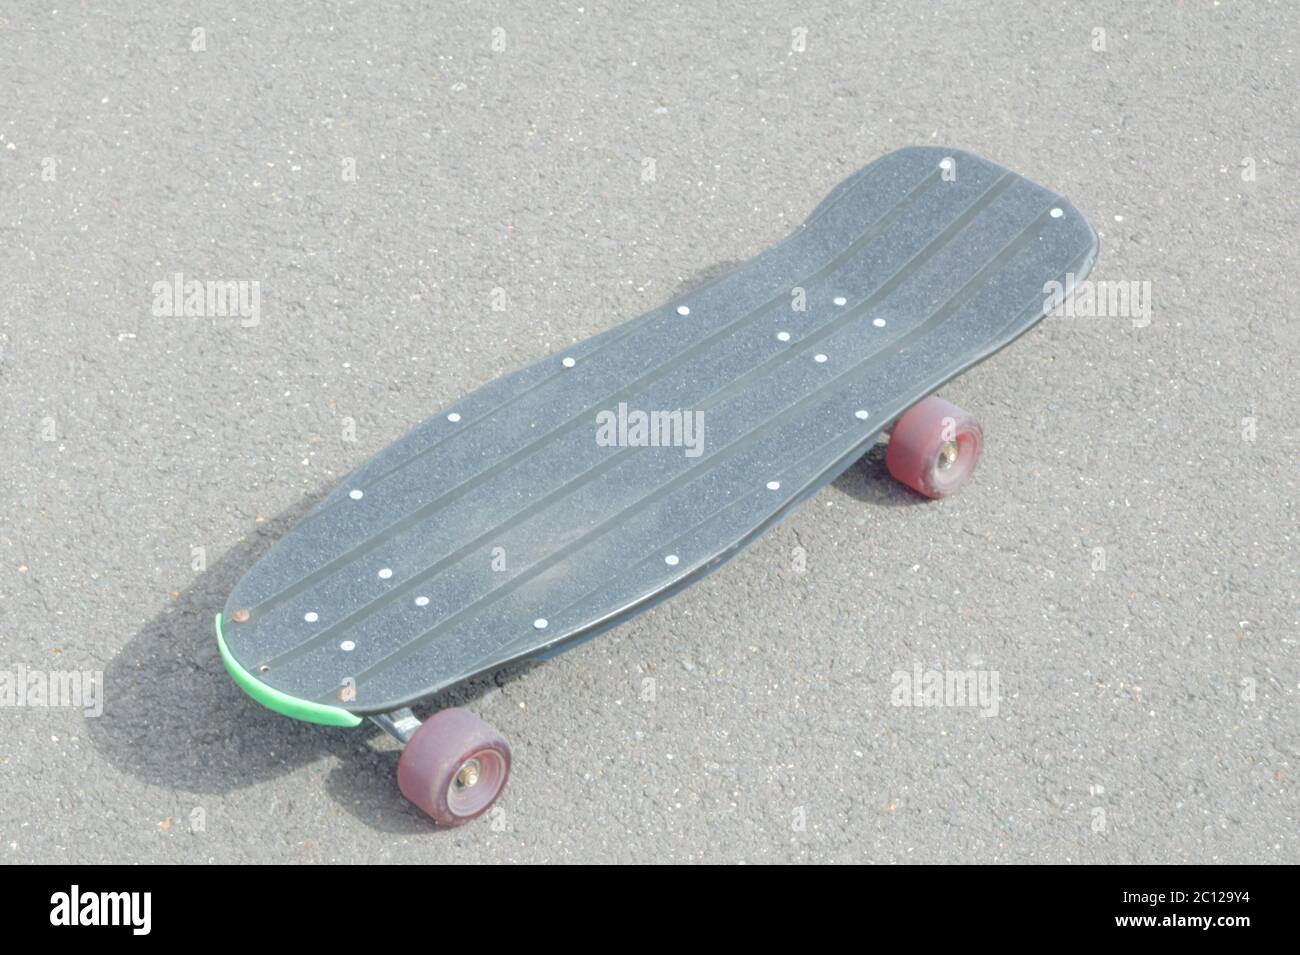 Vintage Skateboard High Resolution Stock Photography and Images - Alamy